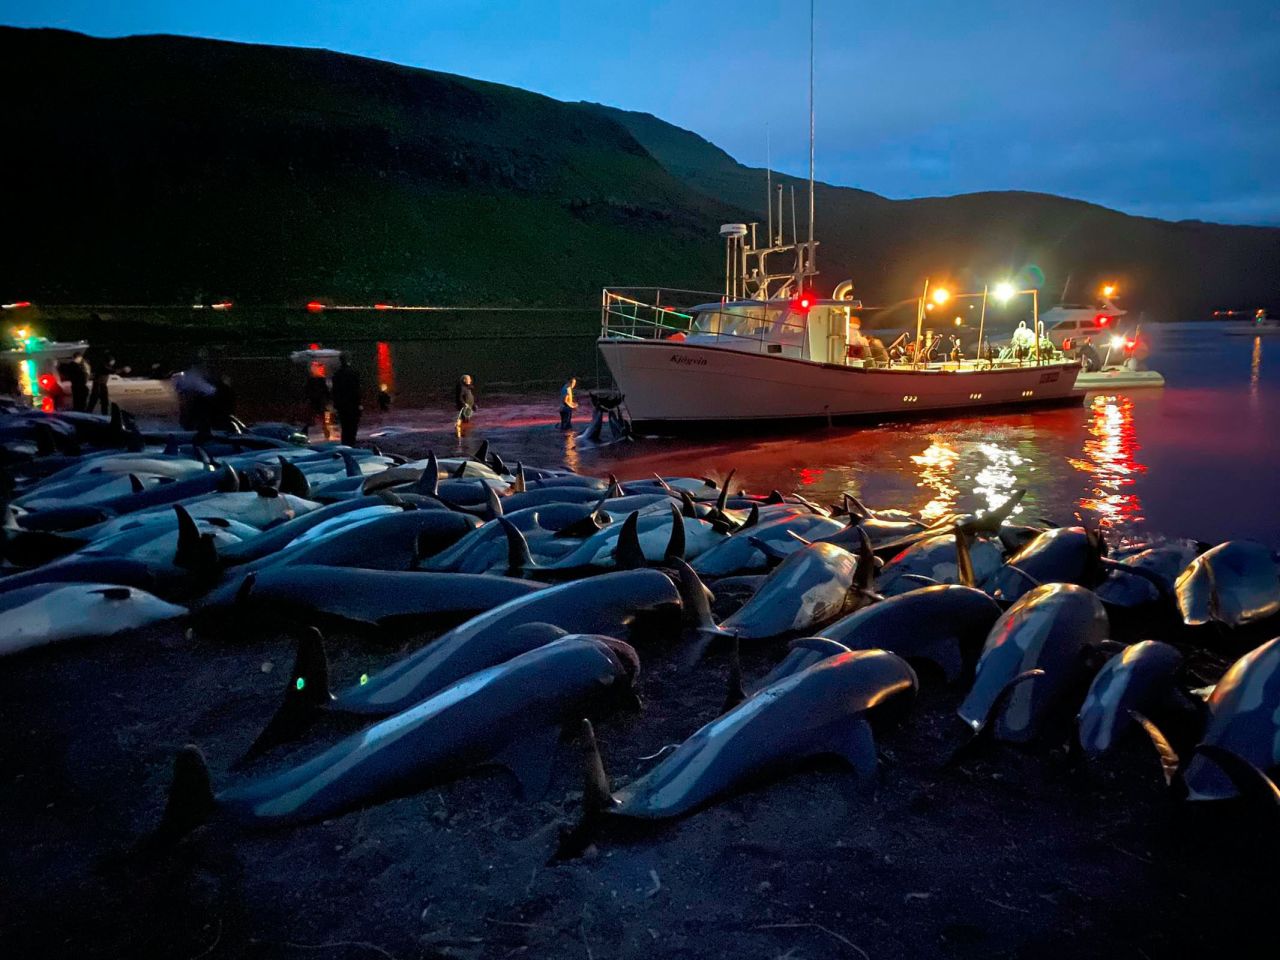 The carcasses of dead white-sided dolphins lie on a beach after being pulled from blood-stained waters on the island of Eysturoy, which is part of the Faroe Islands, on Sunday, September 12. <a href="https://www.cnn.com/2021/09/15/europe/faroe-dolphin-killing-record-scli-intl-scn/index.html" target="_blank">More than 1,400 dolphins were killed</a> in what local authorities said was a traditional whaling hunt. The killing has been denounced by marine conservation group Sea Shepherd as a "brutal and badly mishandled" massacre.